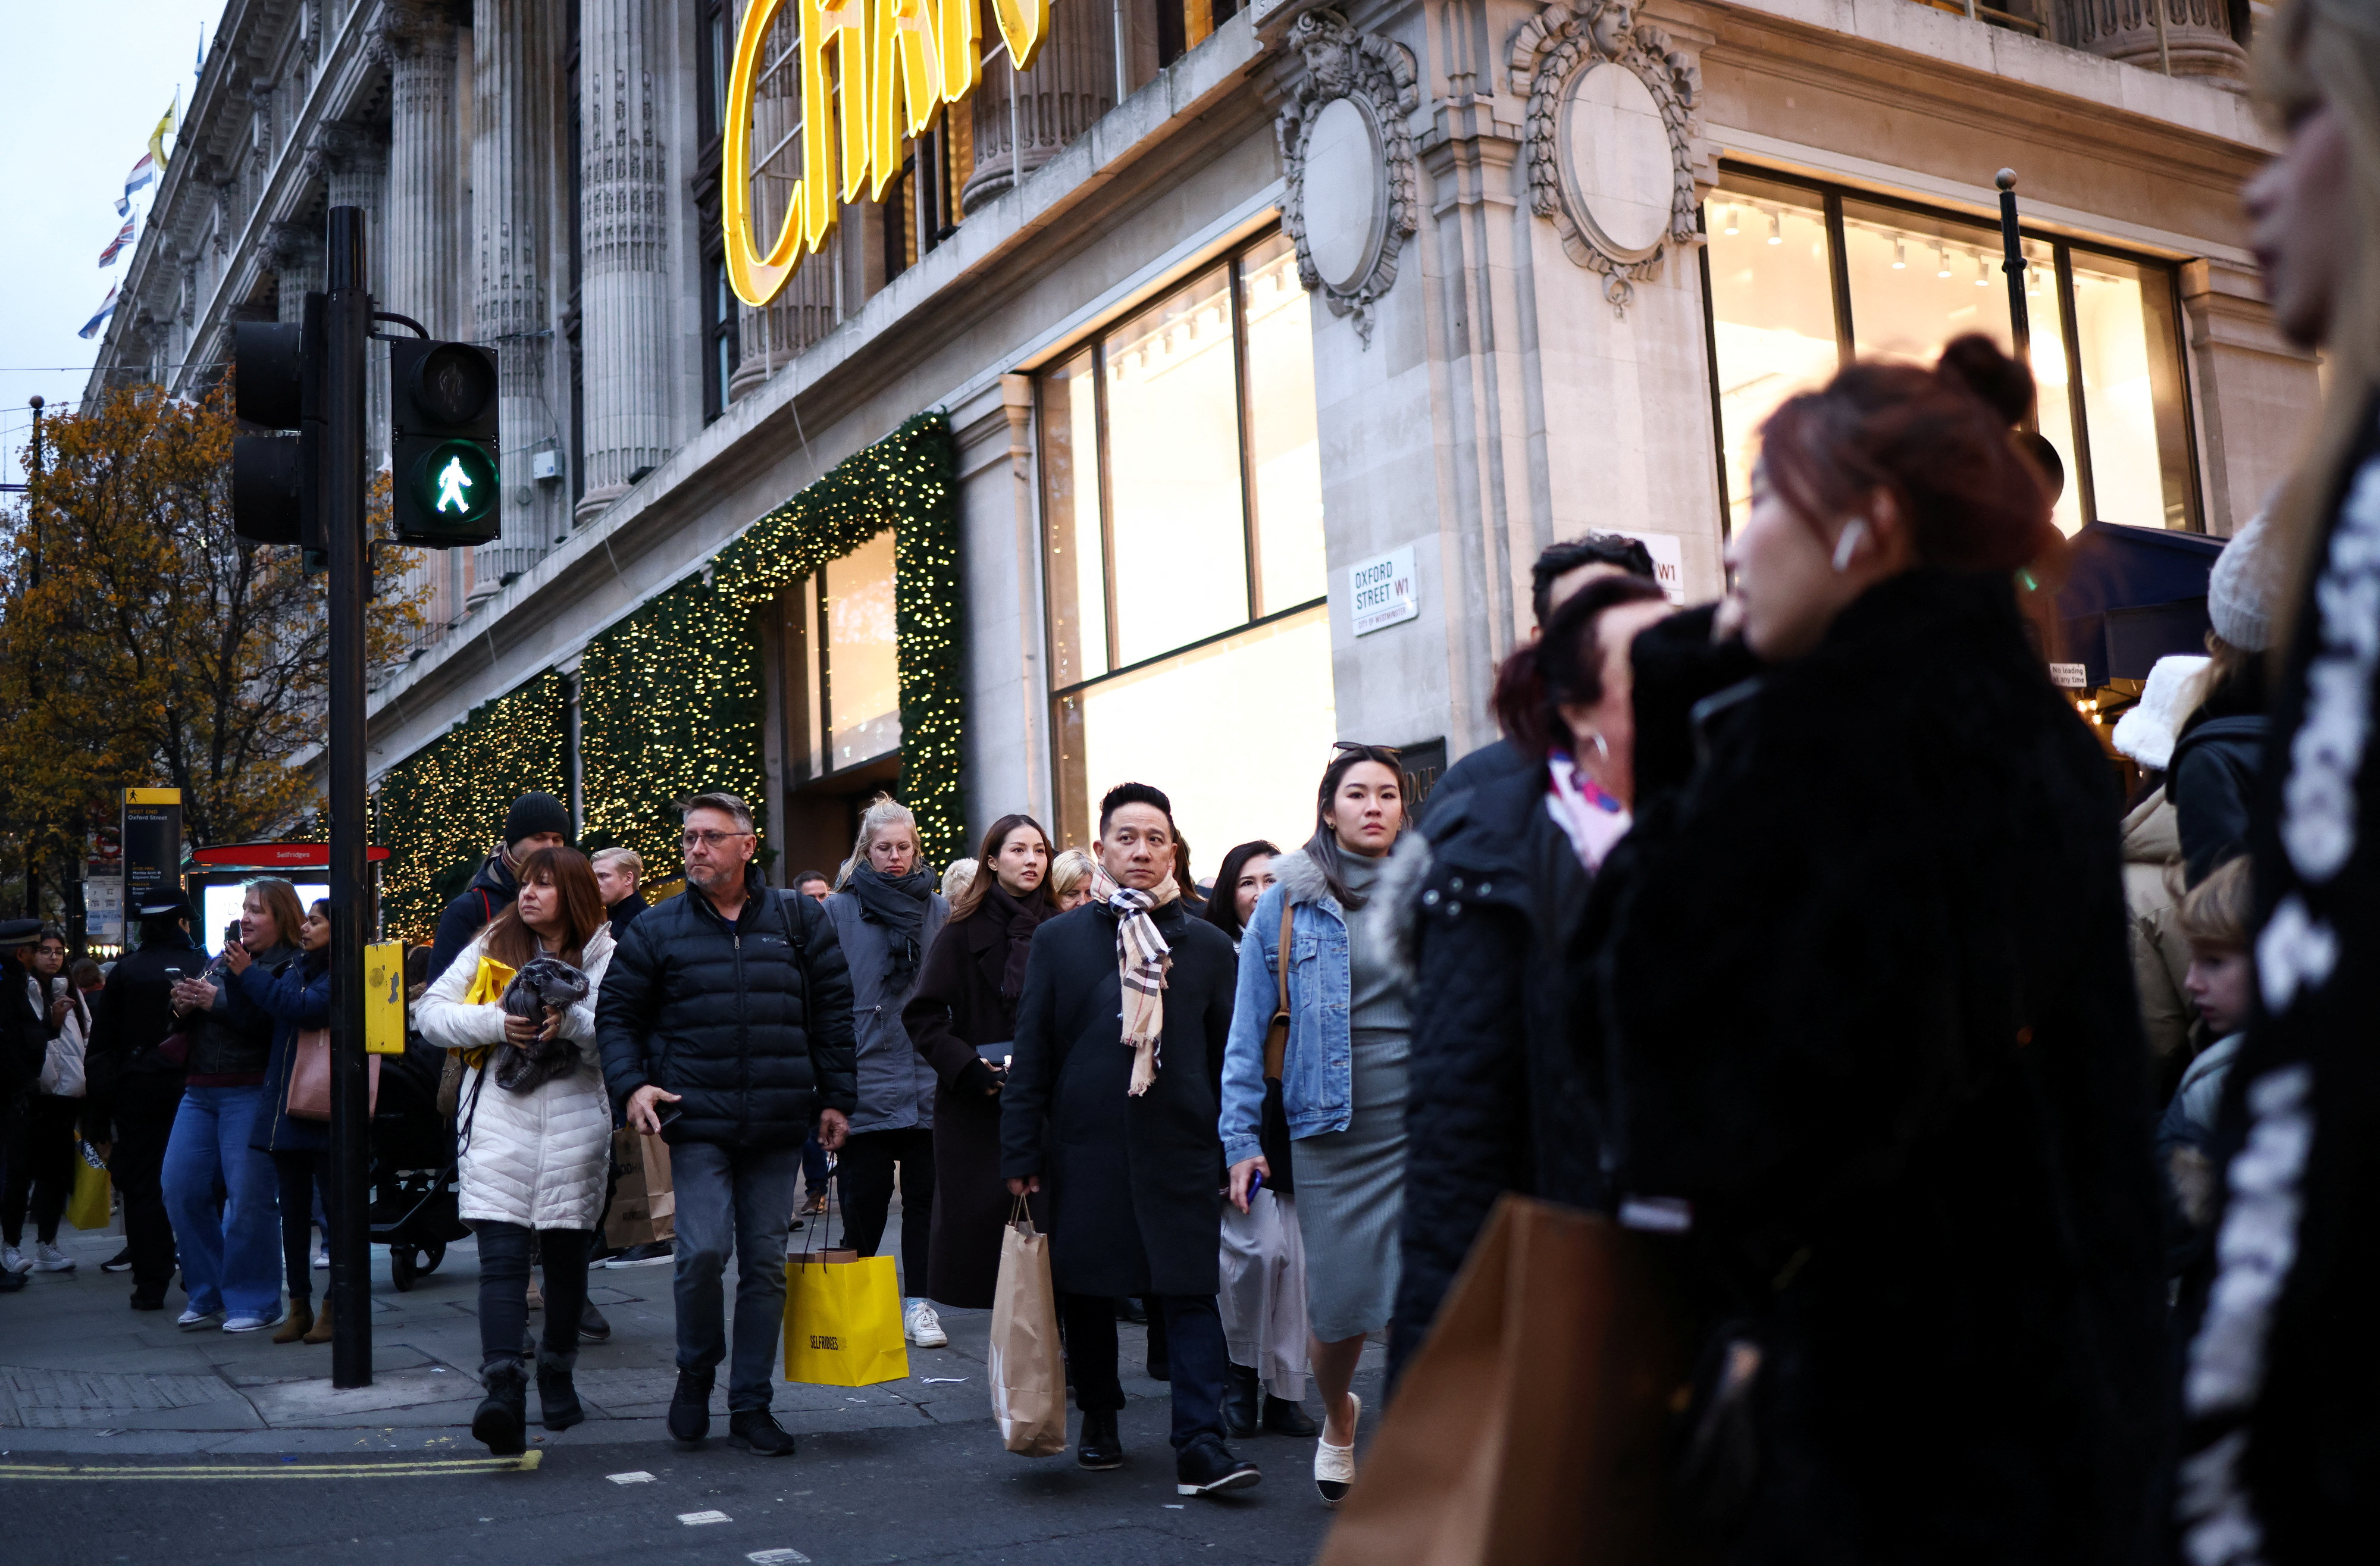 People carry shopping bags as they walk past Christmas themed shop displays on Oxford Street in London